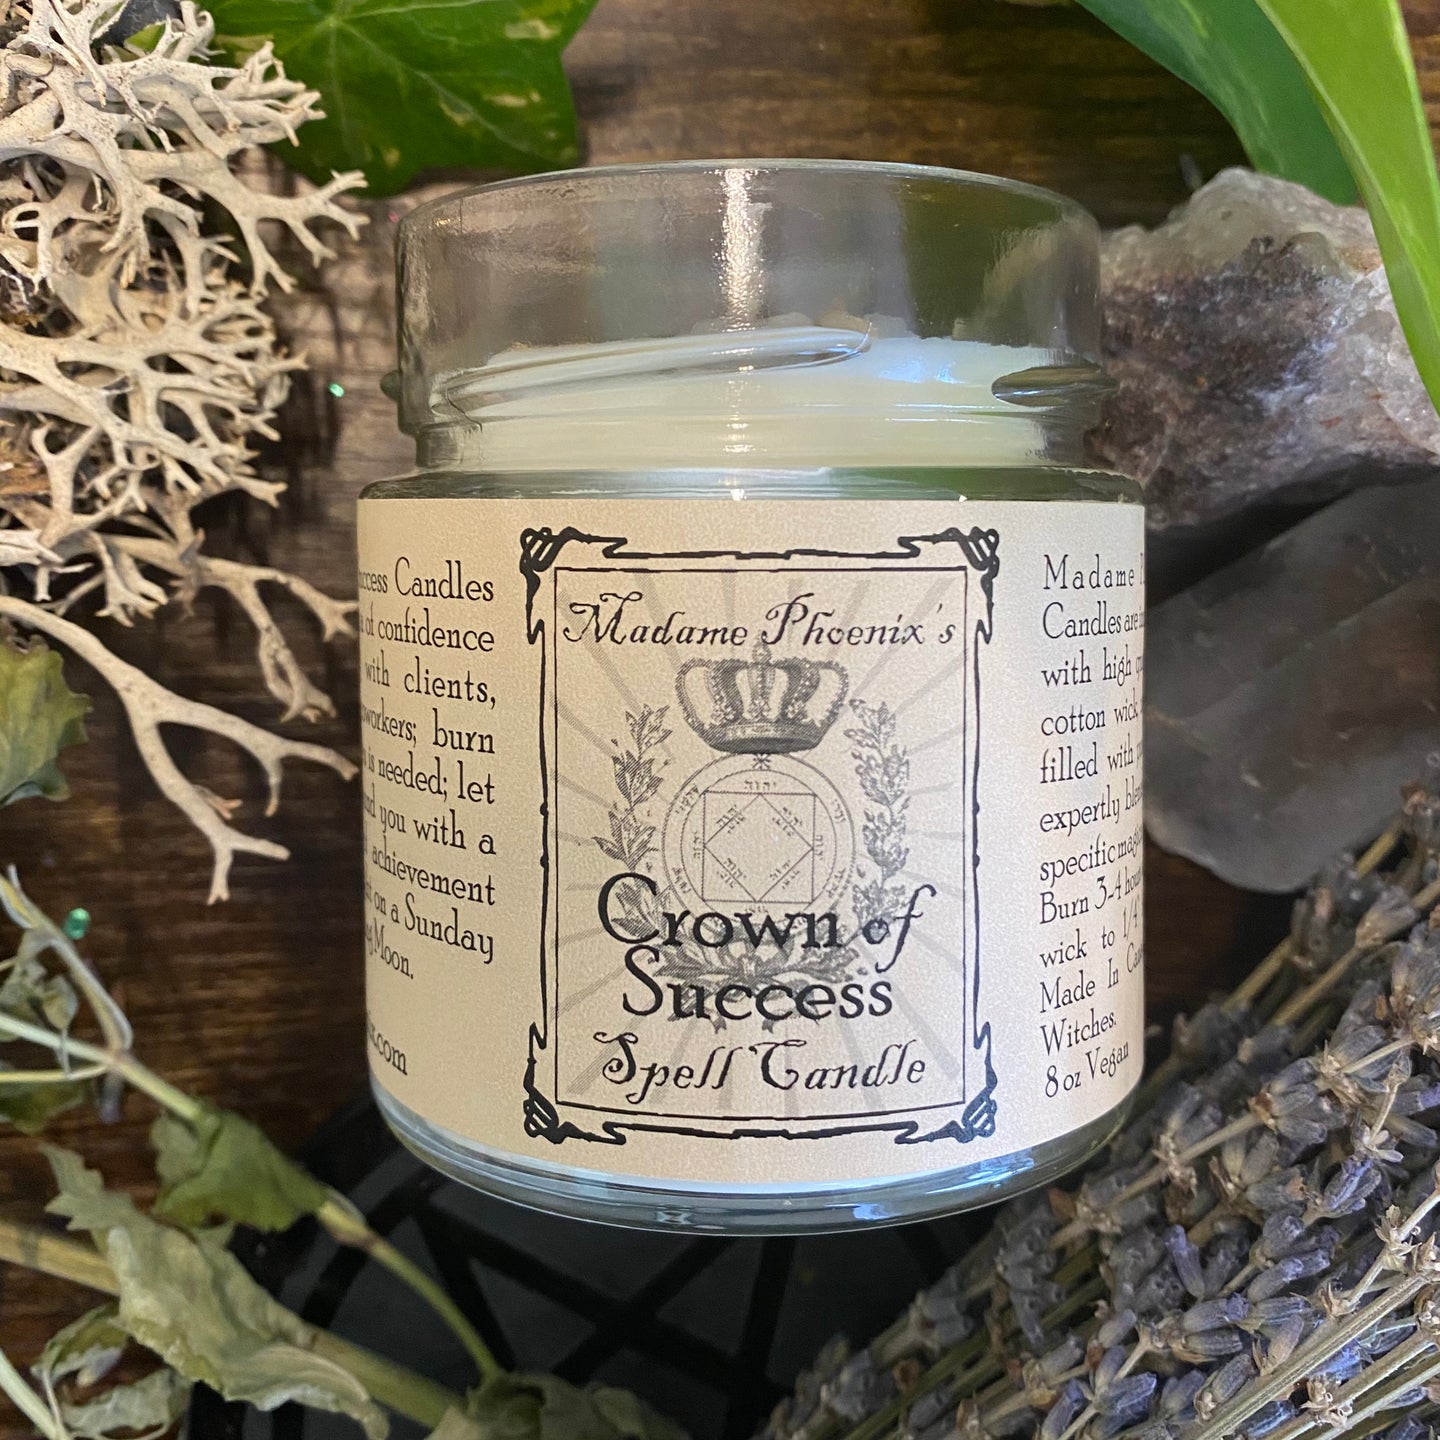 Crown of Success Spell Candle